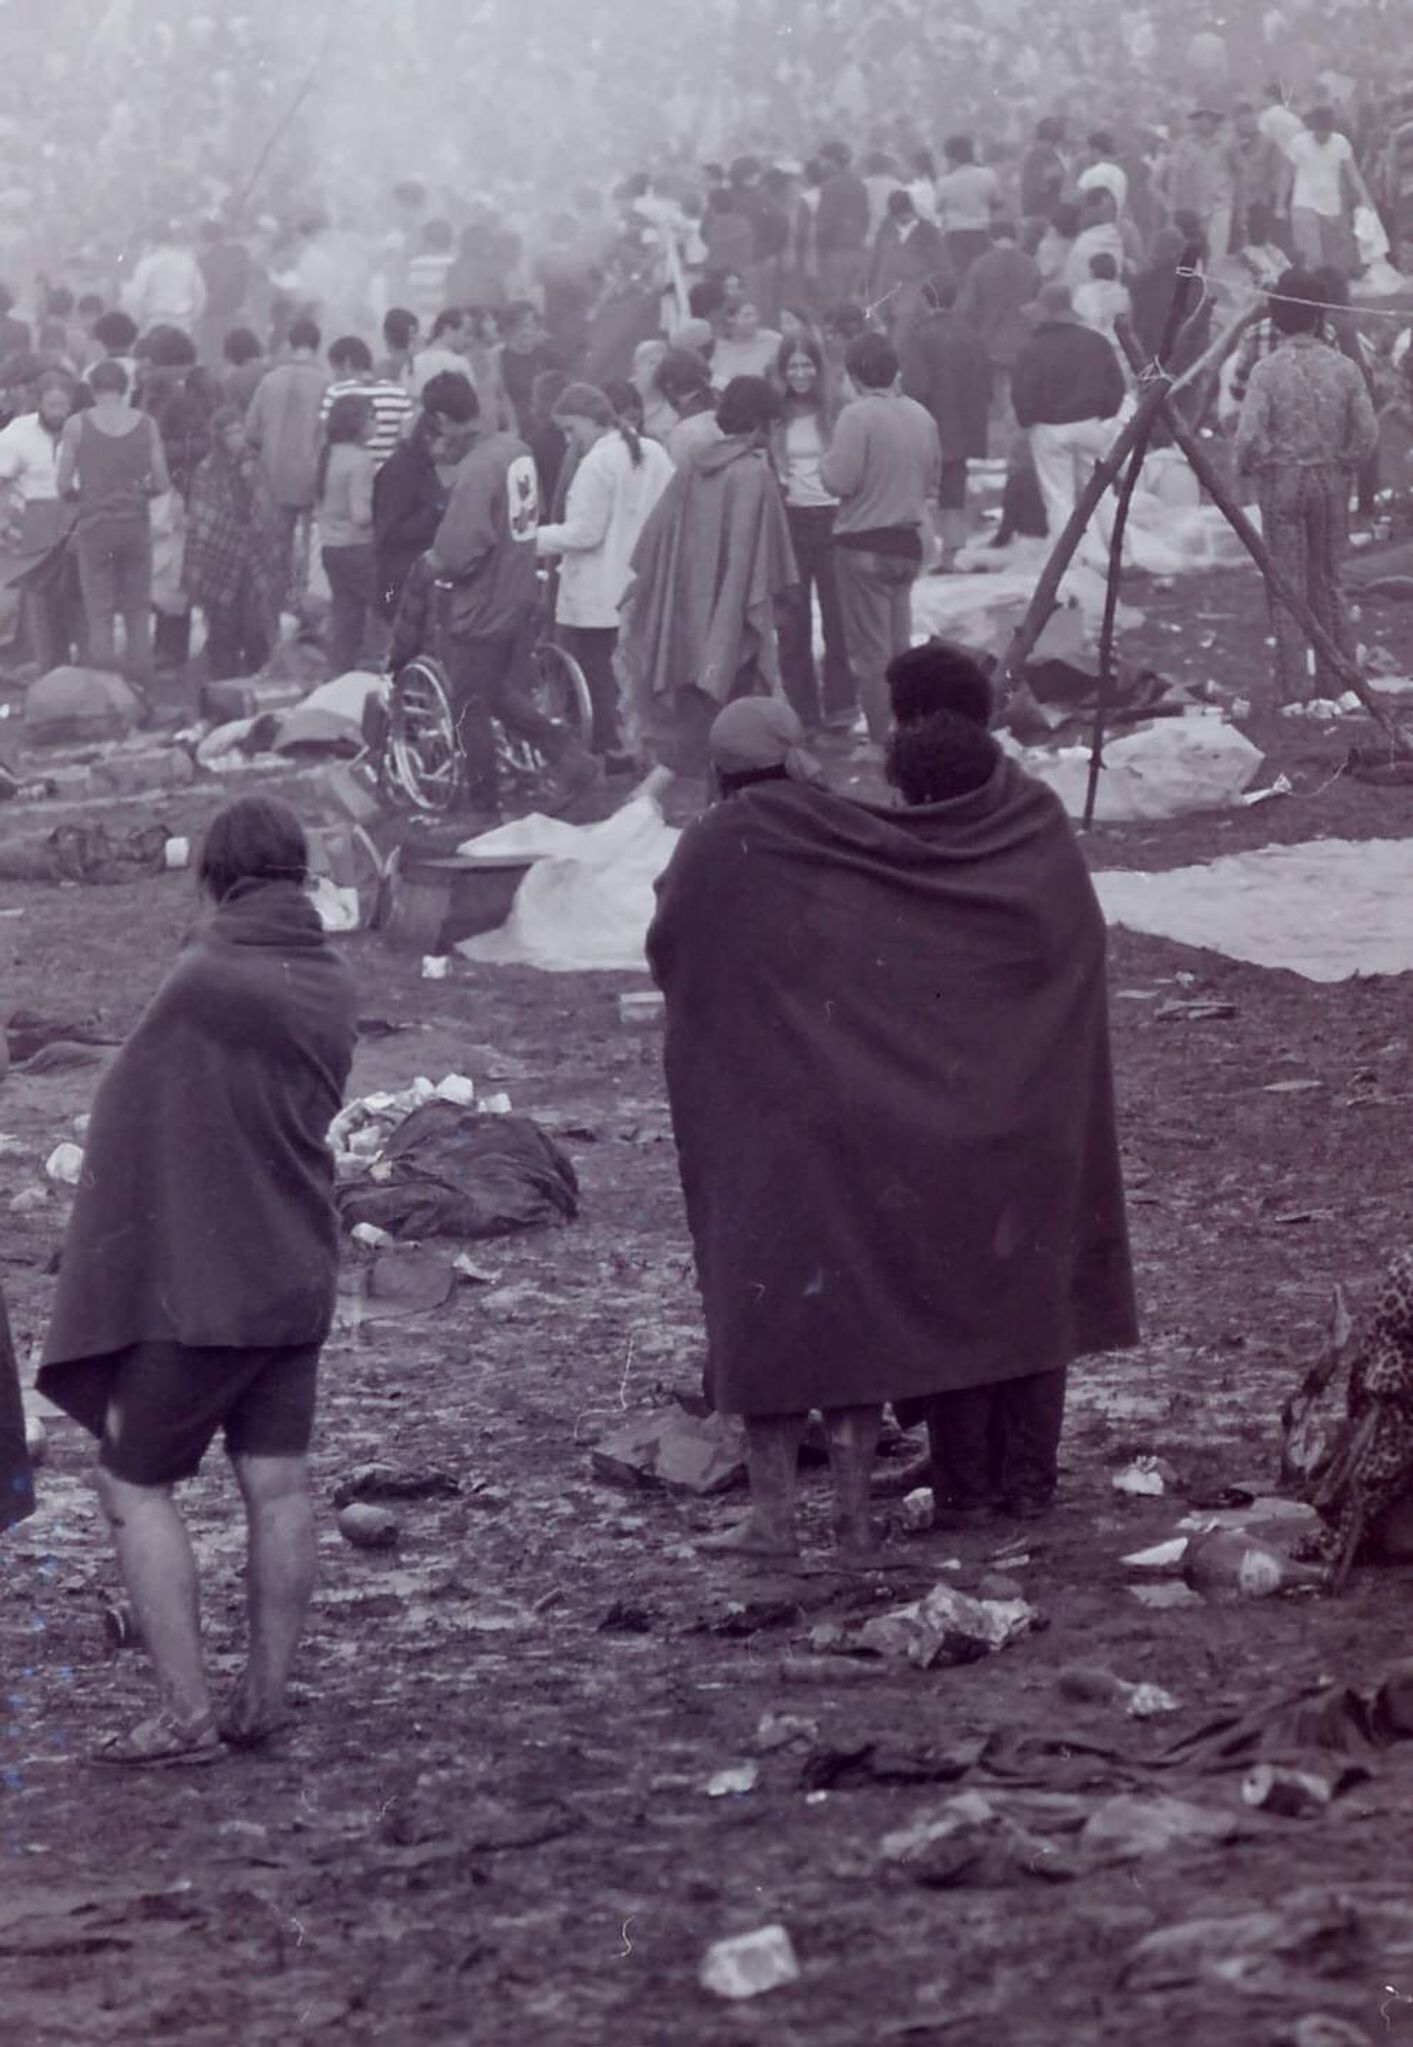 Vietnam and Woodstock had one very sticky thing in common: mud. And lots of it.